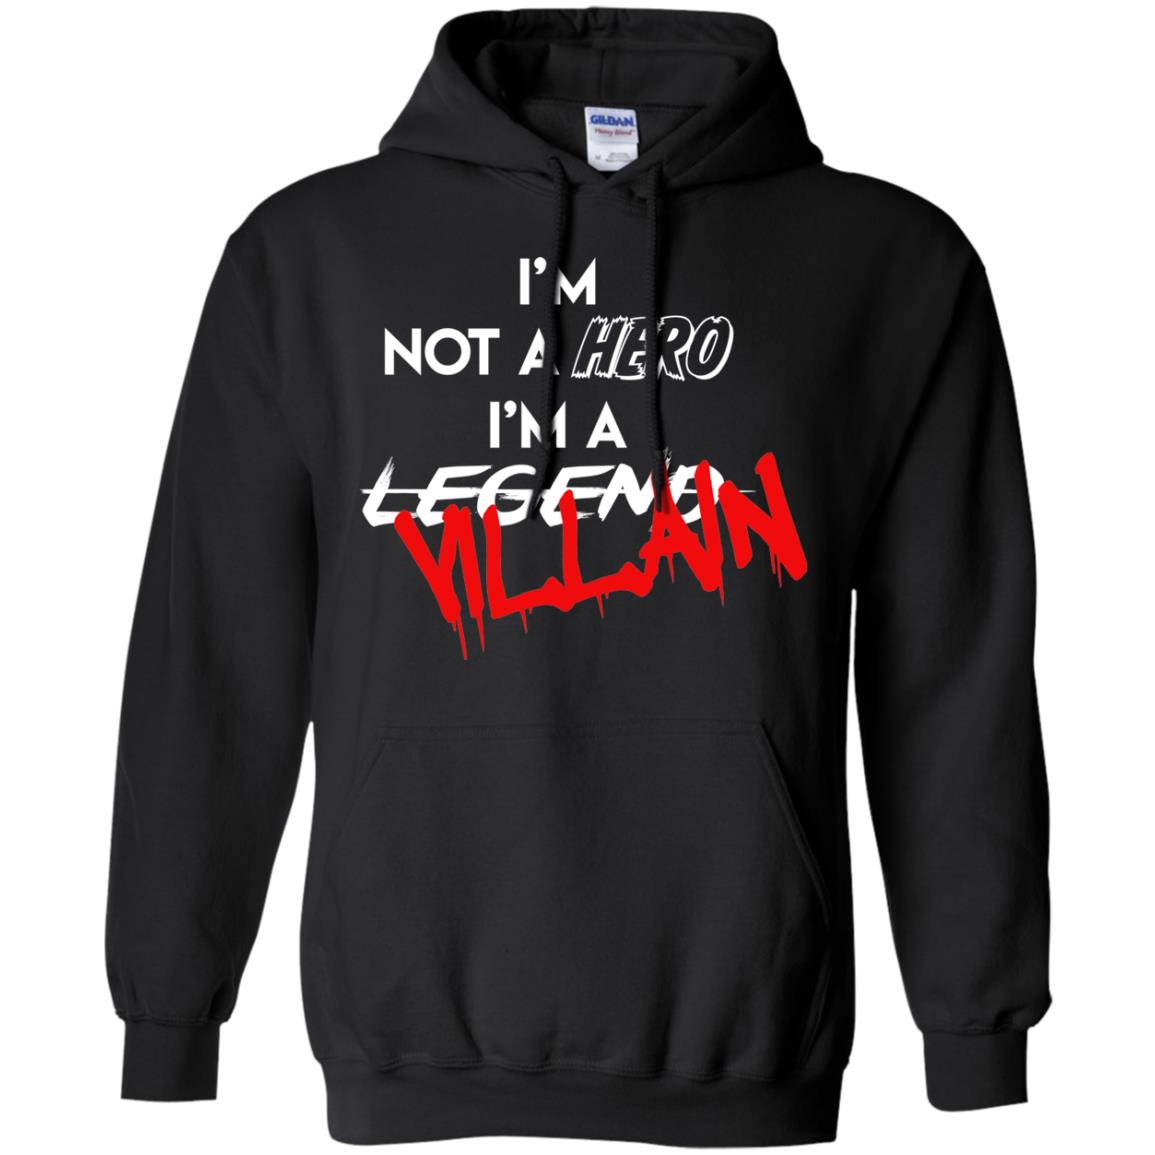 I'm not a Hero Villain Pullover Hoodie